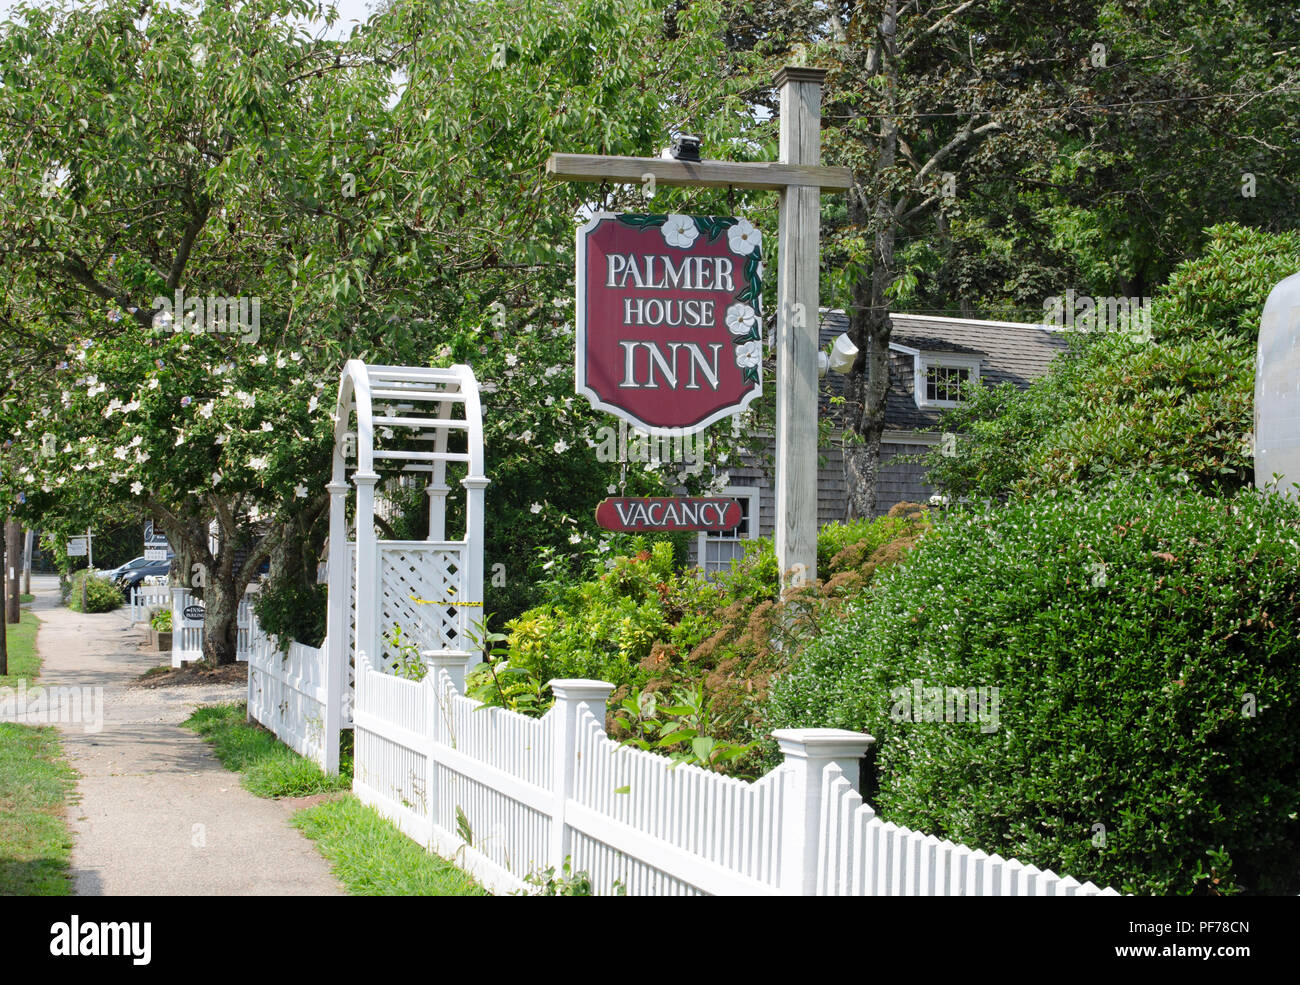 Tree lined street in Falmouth, Cape Cod, Massachusetts during summer with sign for the Palmer House Inn with vacancy, white picket fence and arbor Stock Photo